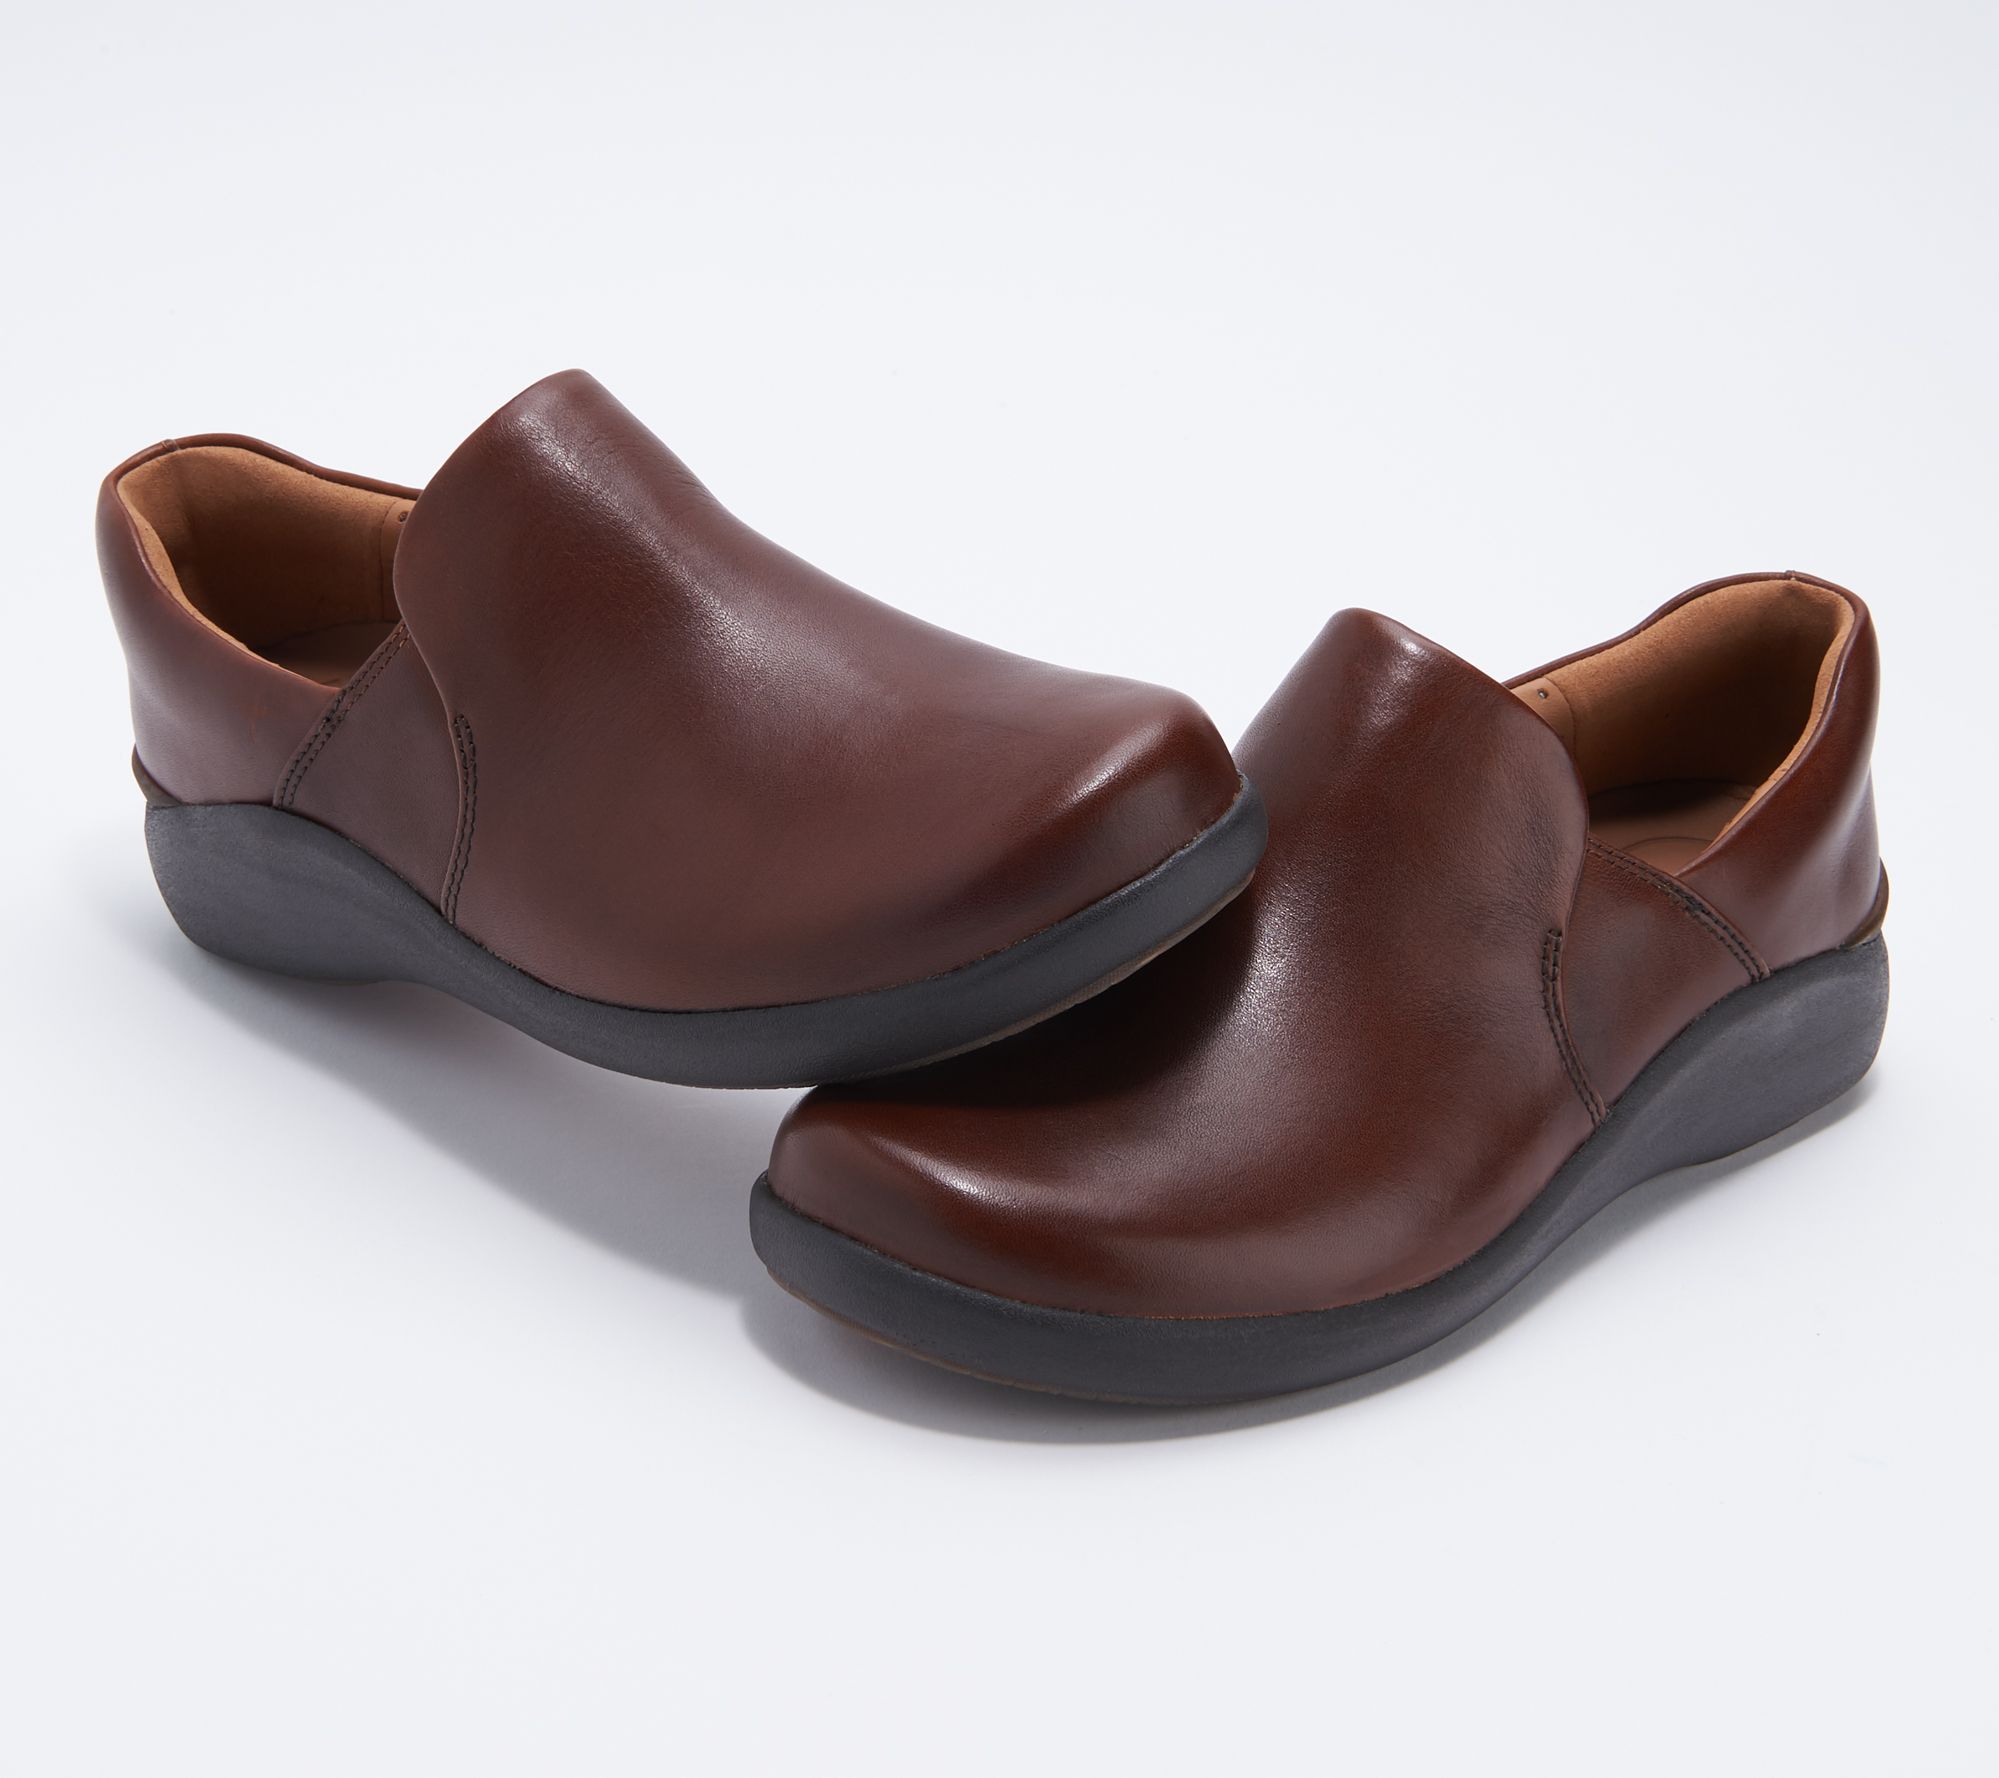 As Is" Clarks Unstructured Leather Slip-On Shoes- Un Loop 2 Step QVC.com